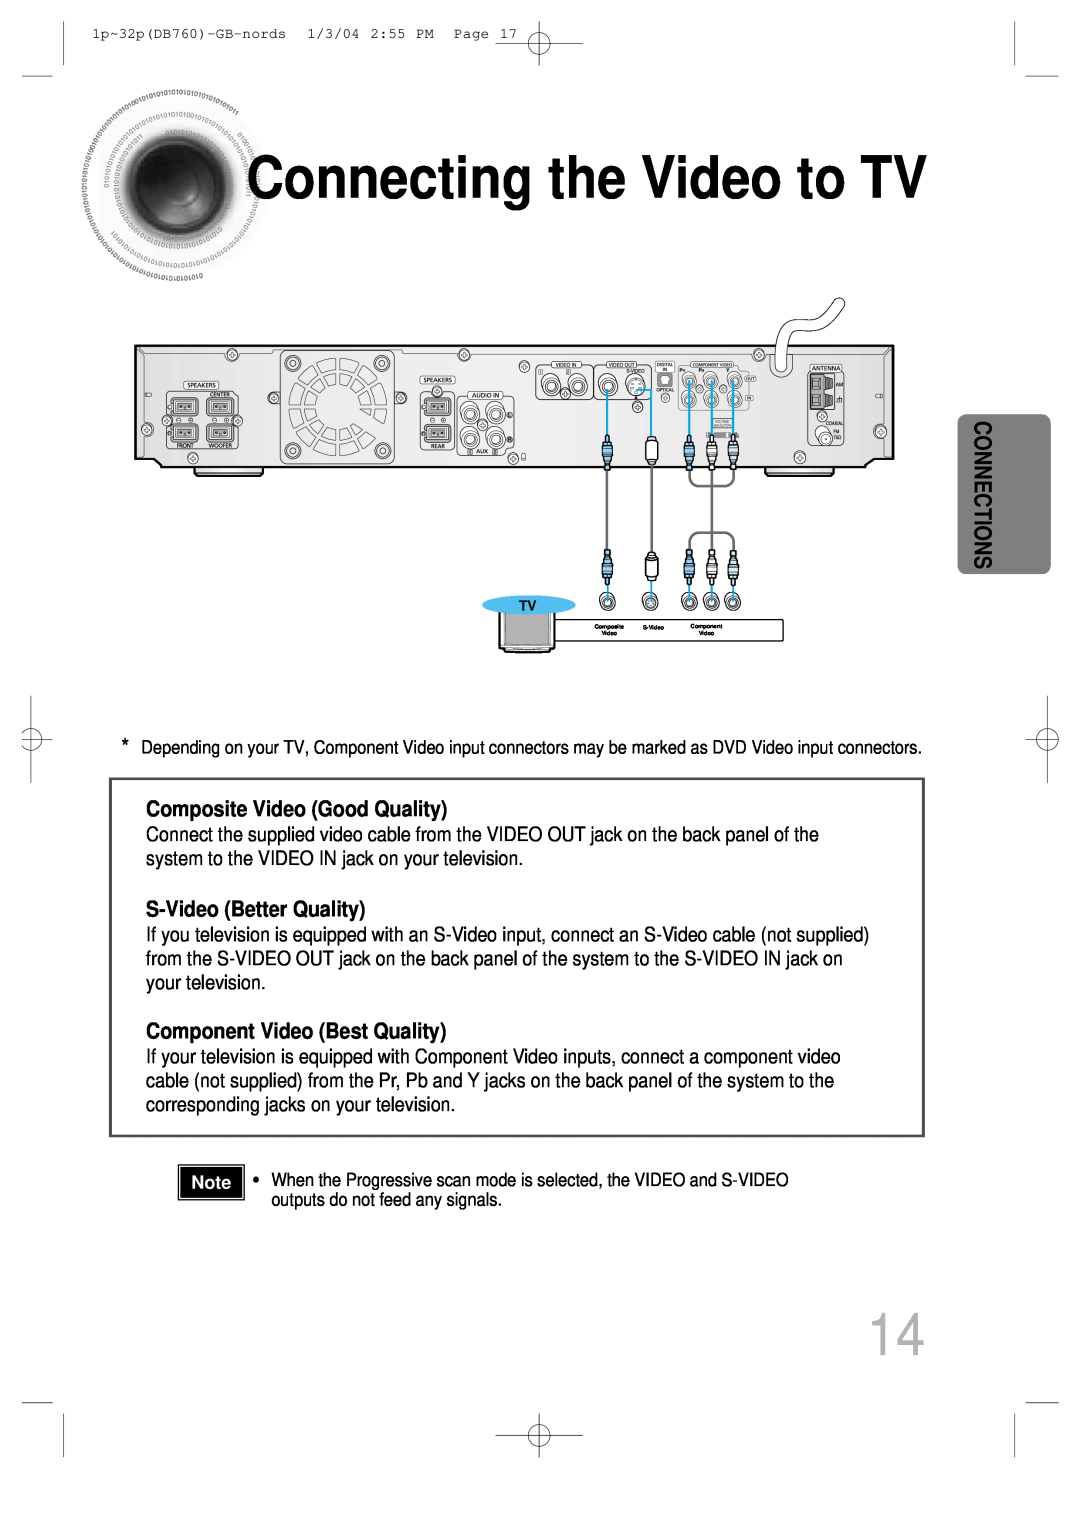 Samsung HTDB760TH/XSG manual Connectingthe Video to TV, Composite Video Good Quality, S-Video Better Quality, Connections 